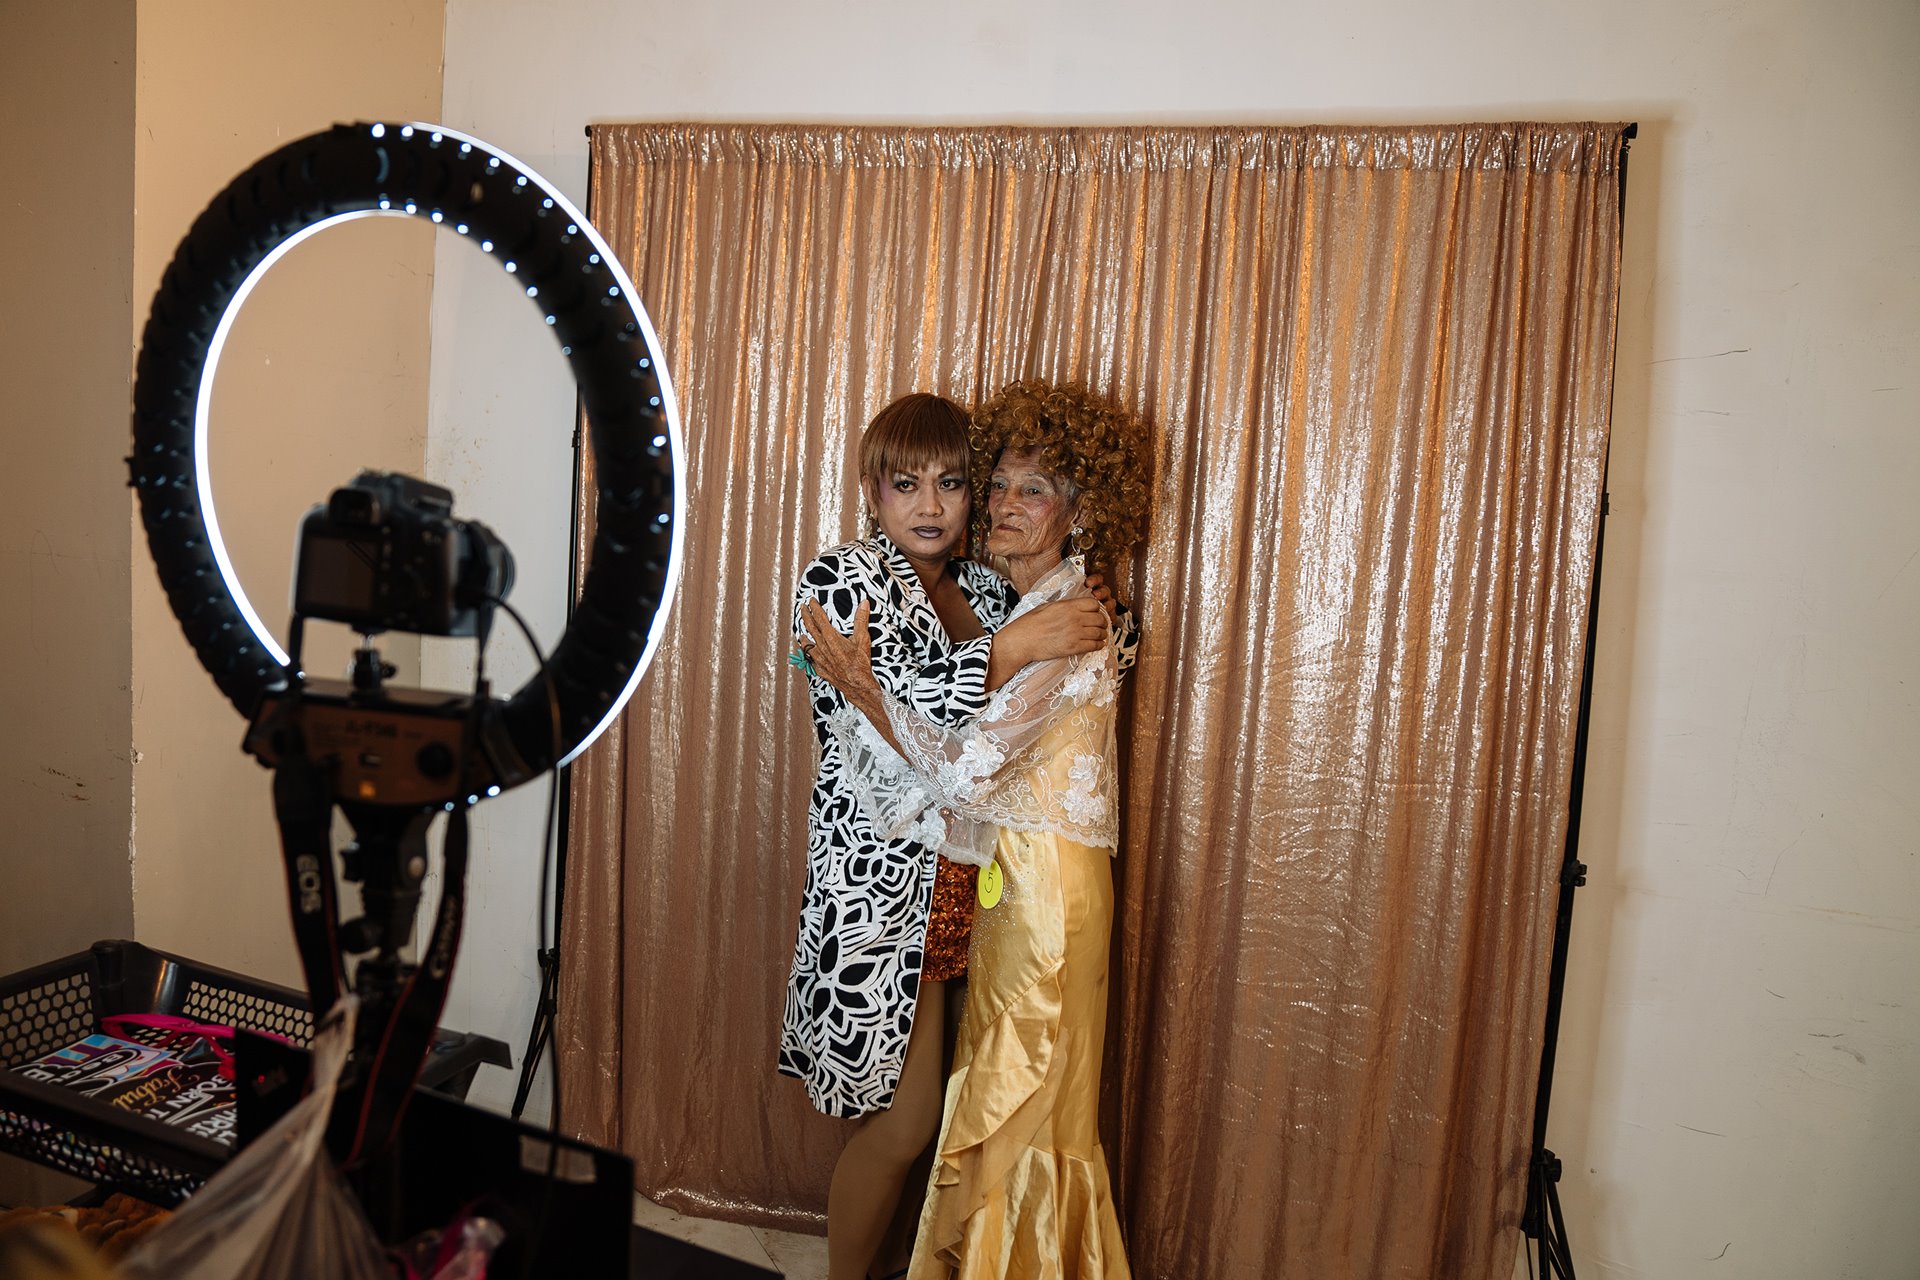 Al Enriquez (86) and Zoraida Sanchez pose in a photo booth during a show in Manila, the Philippines.